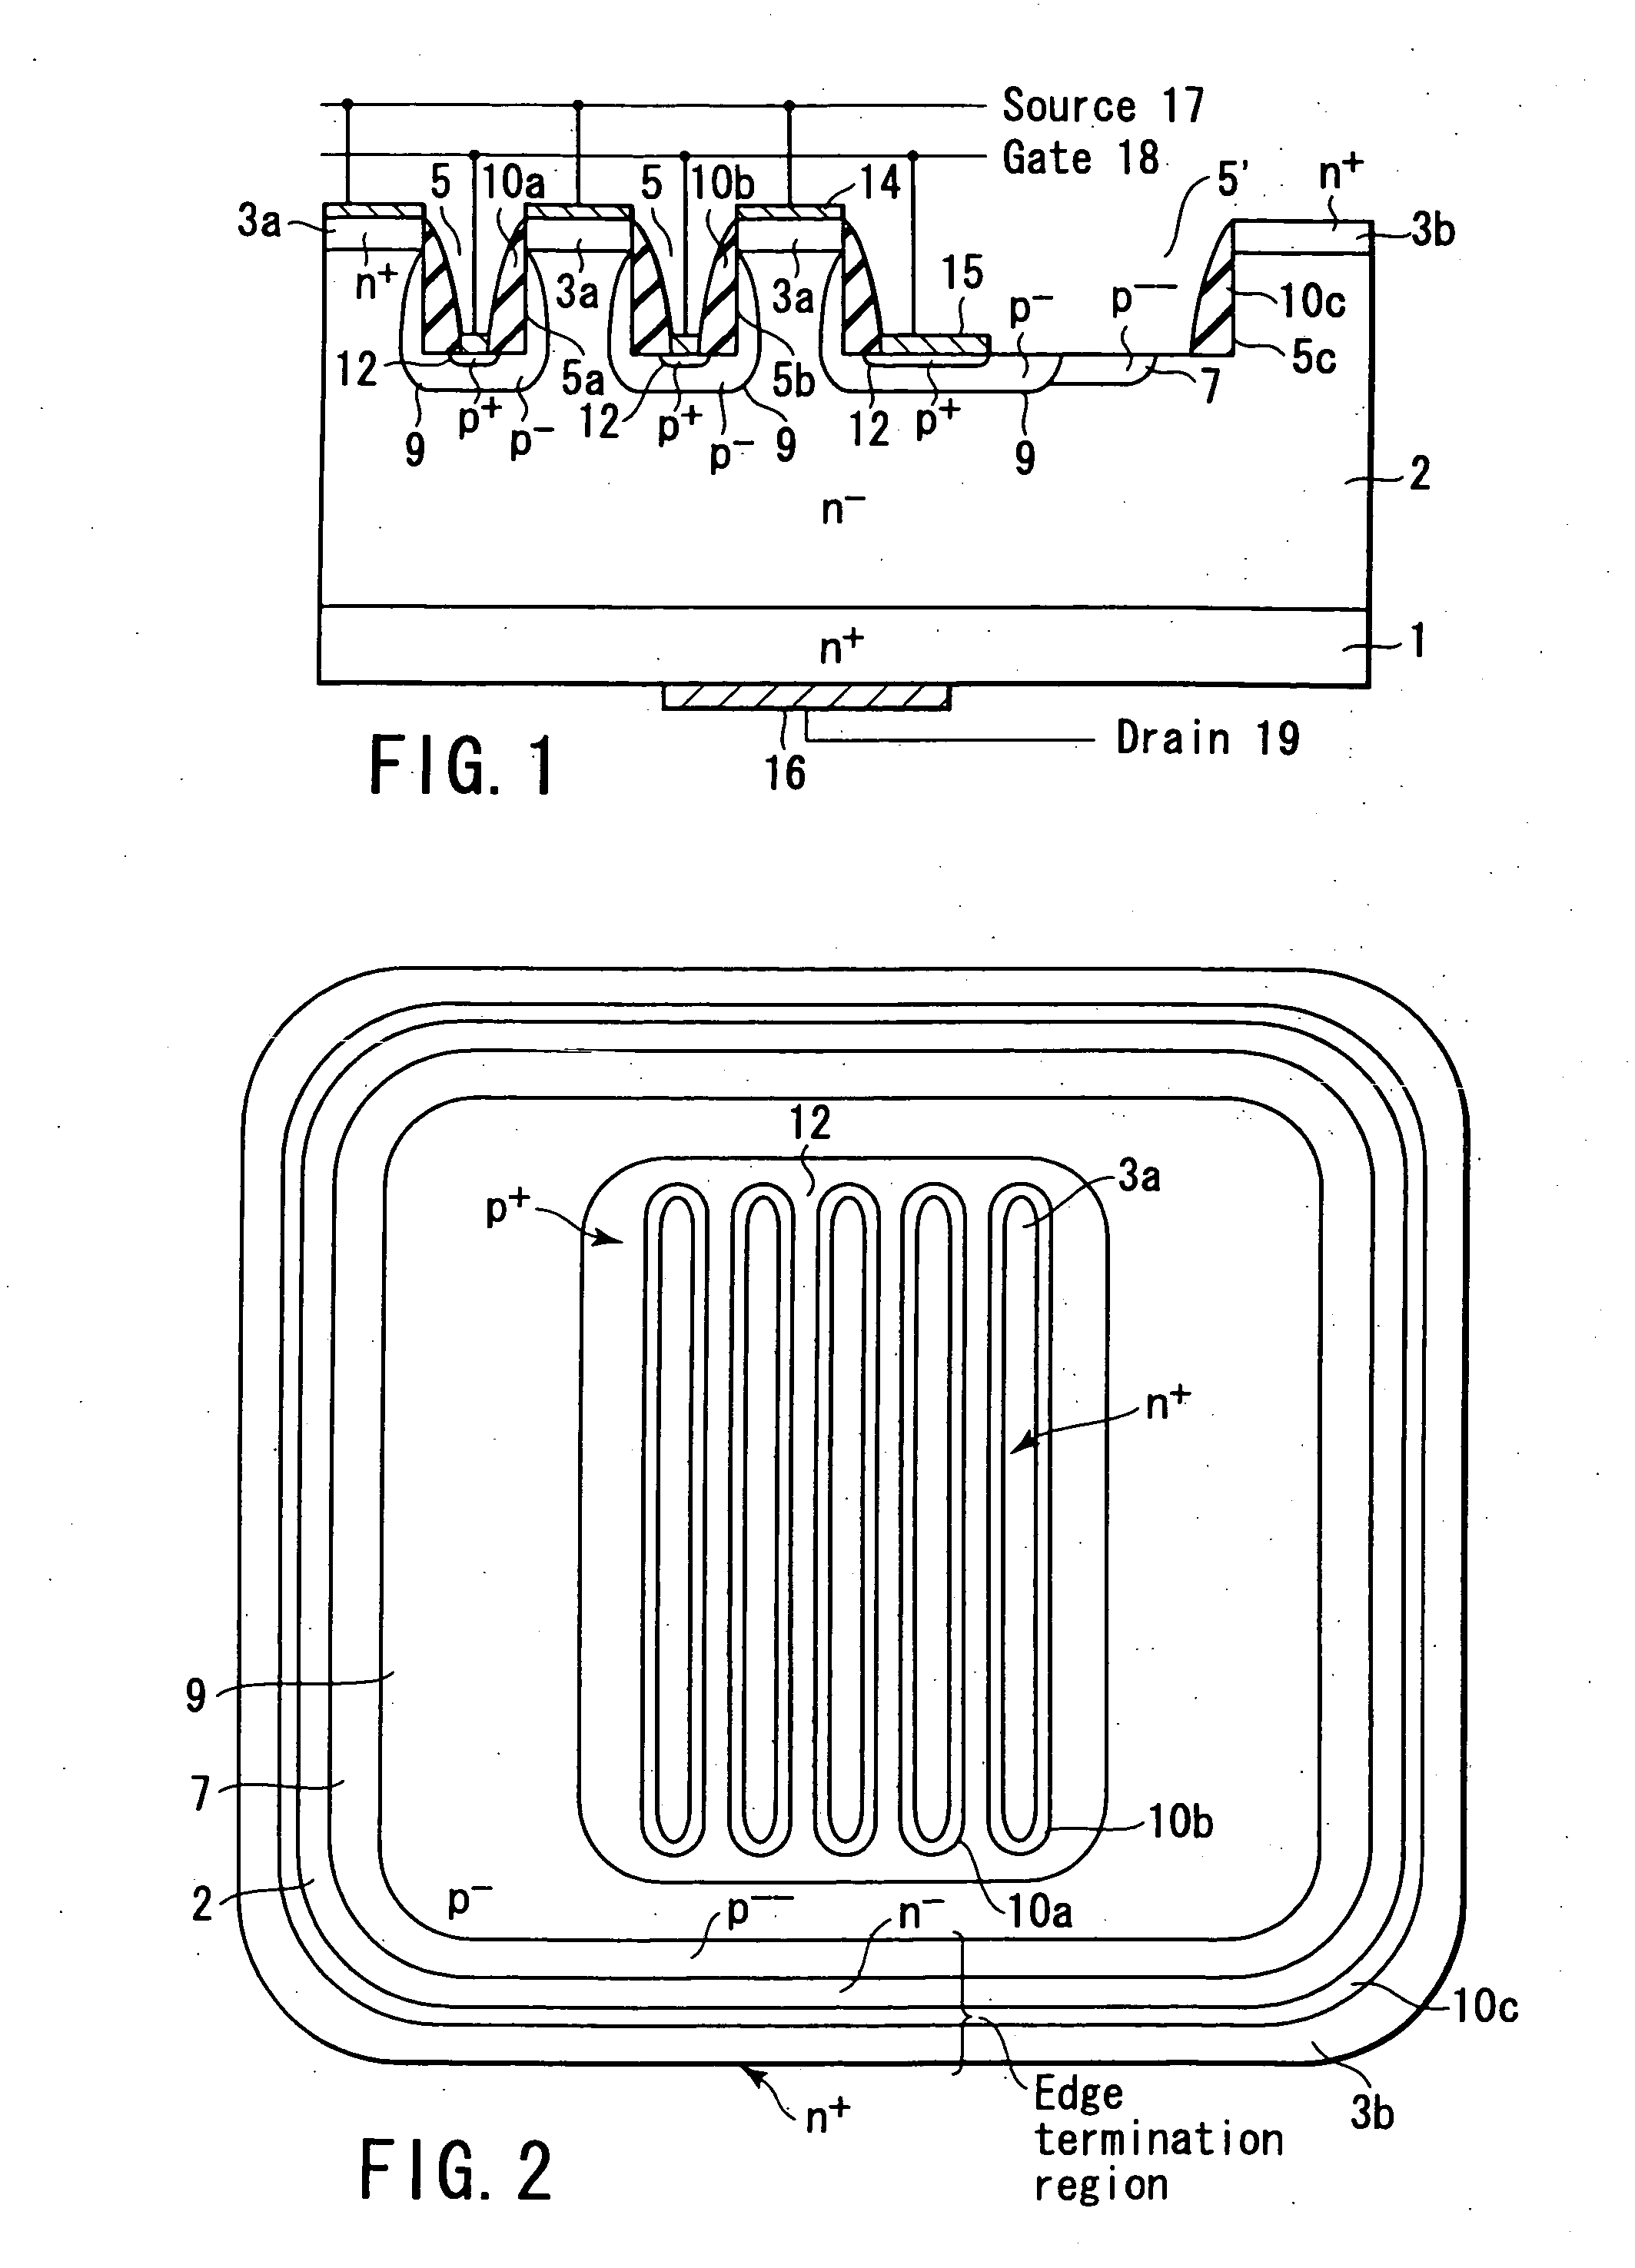 High-breakdown-voltage semiconductor device